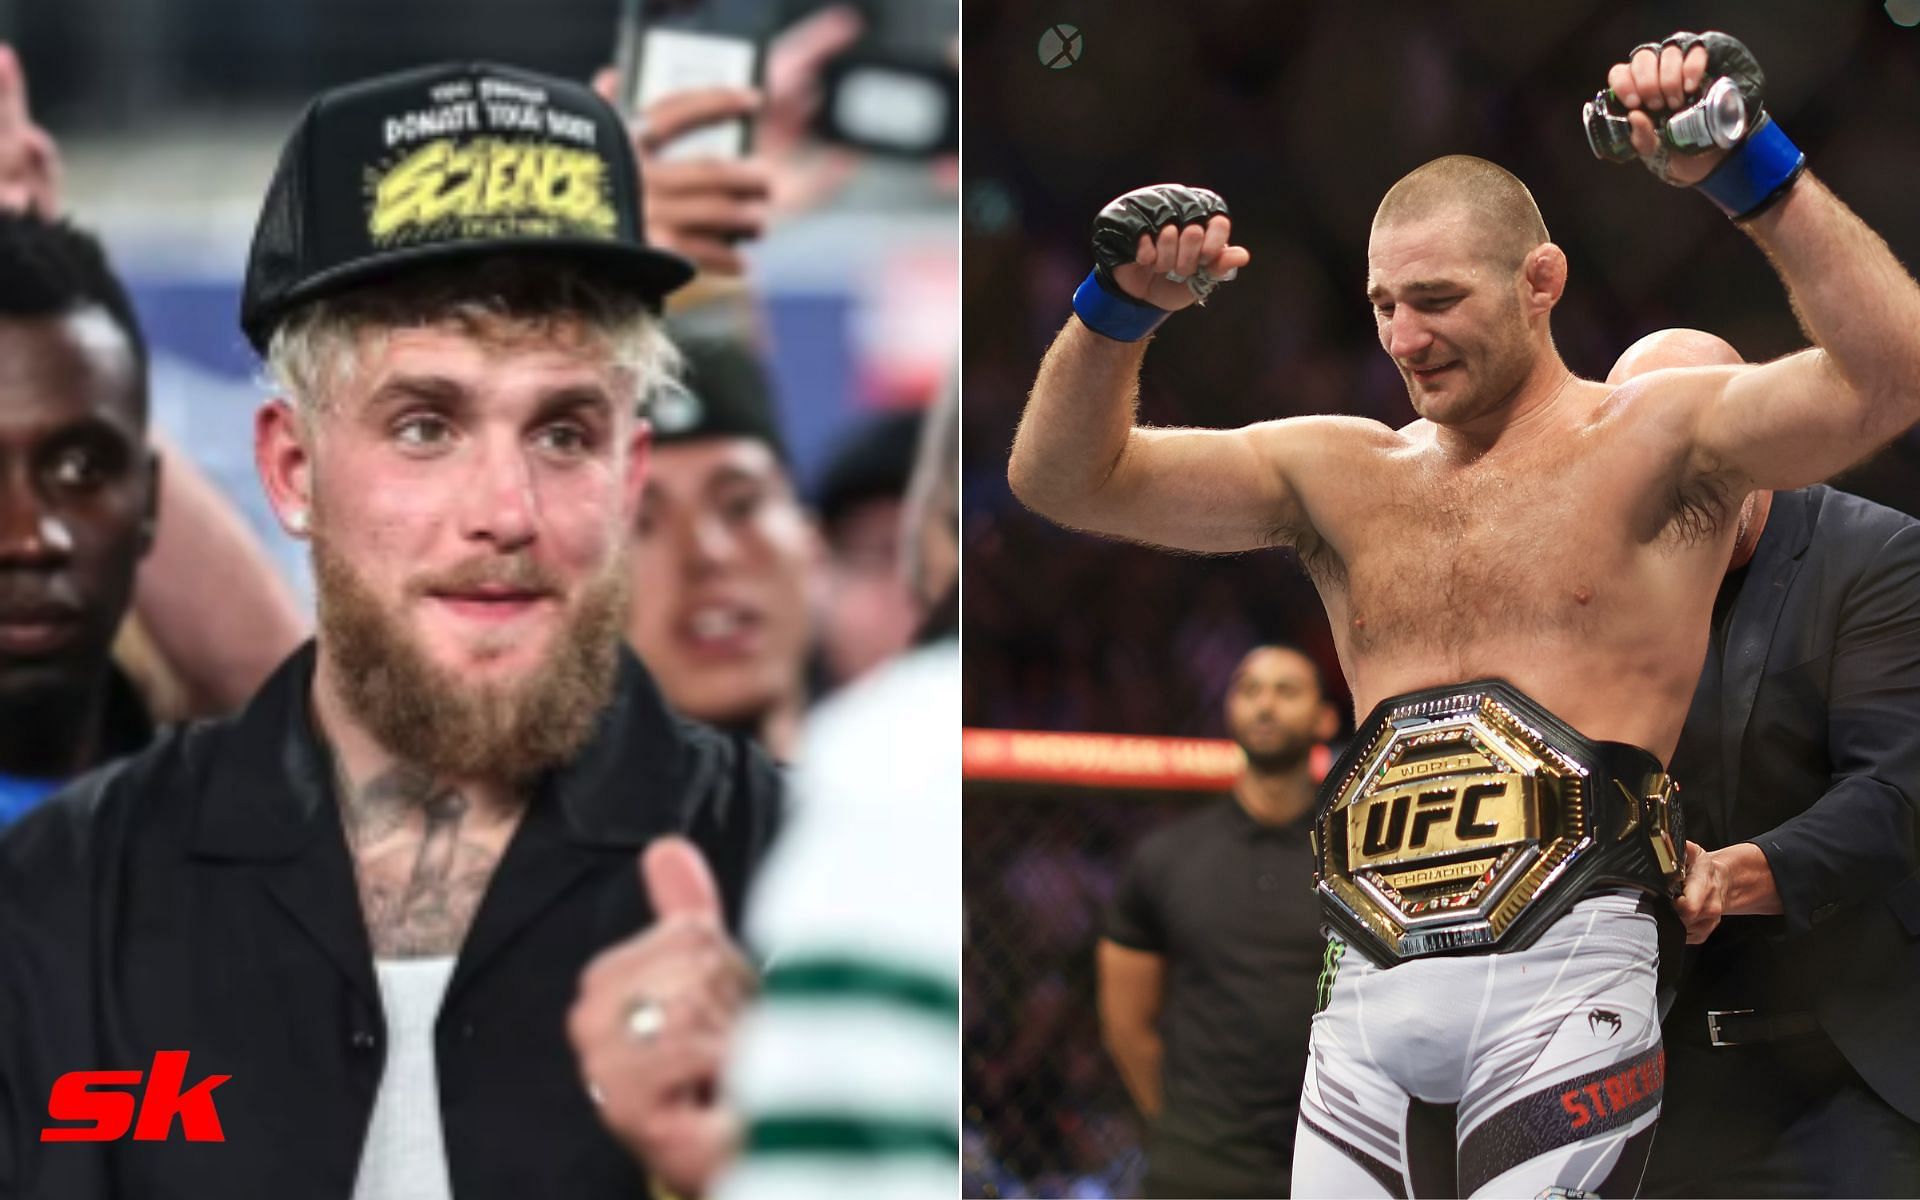 Jake Paul at the NFL game (left - via @DailyStar_Sport), Sean Strickland with new UFC belt (right - via Getty)